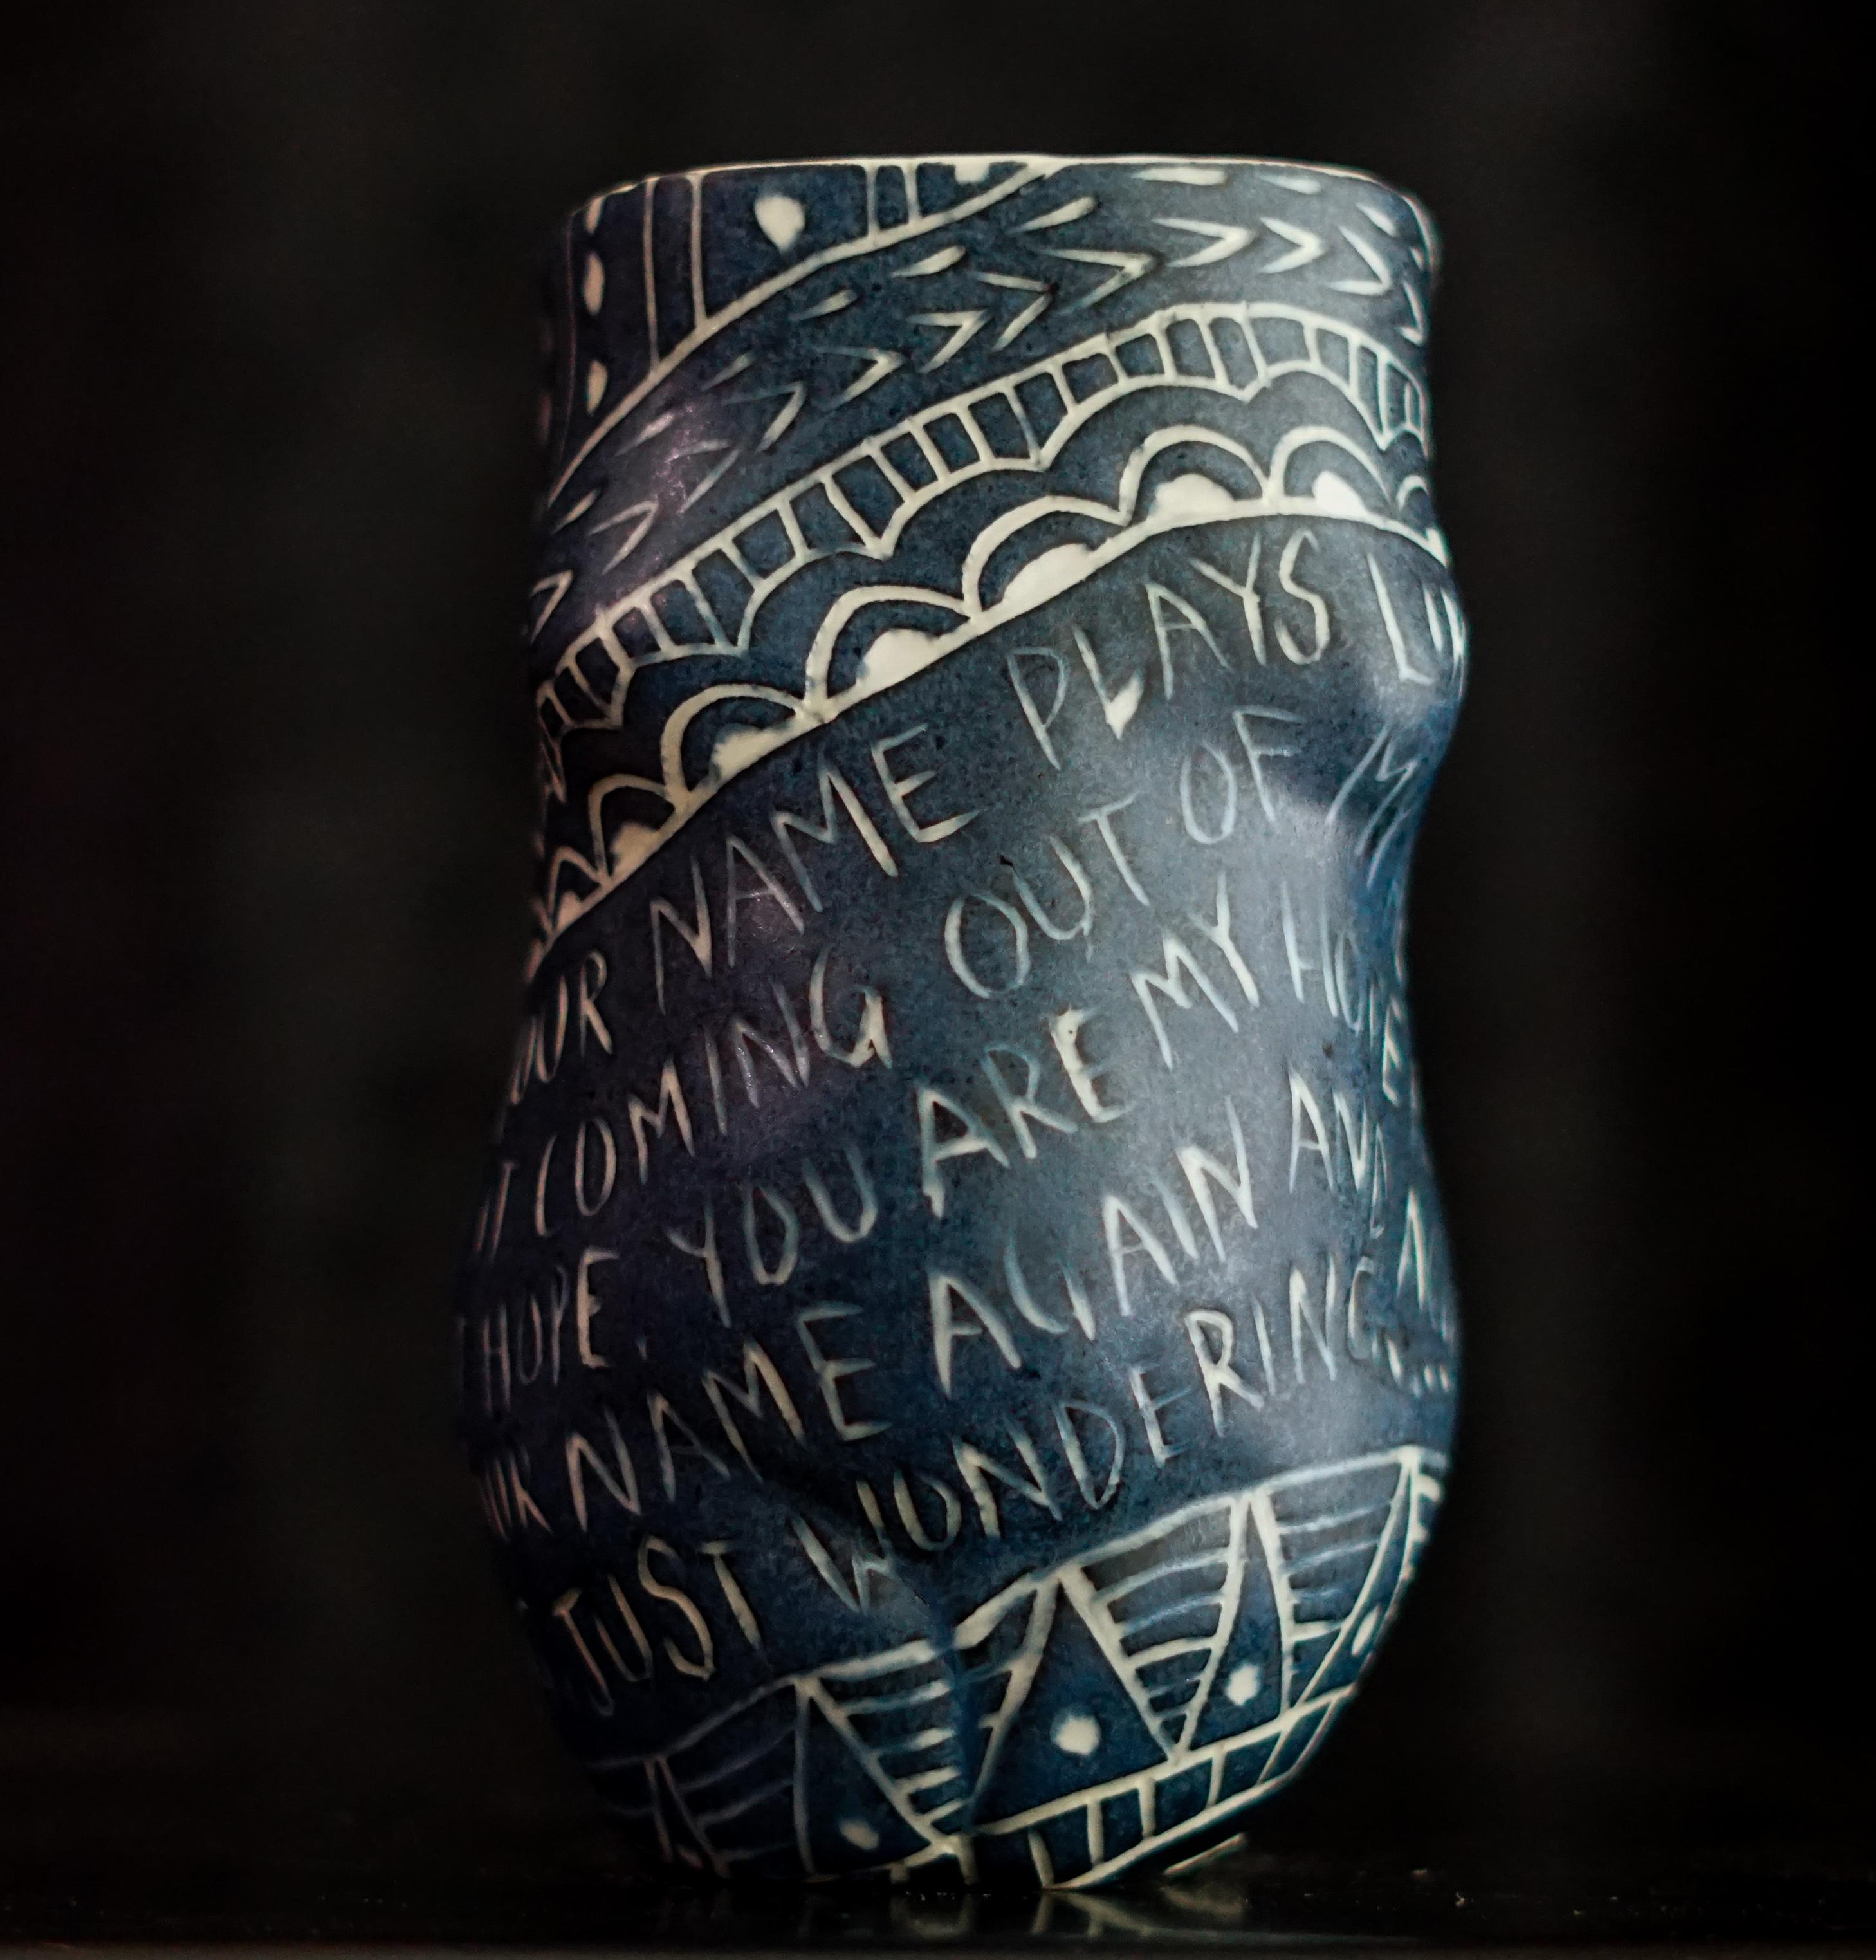 Alex Hodge Abstract Sculpture - “Your Name Plays...” Porcelain cup with sgraffito detailing